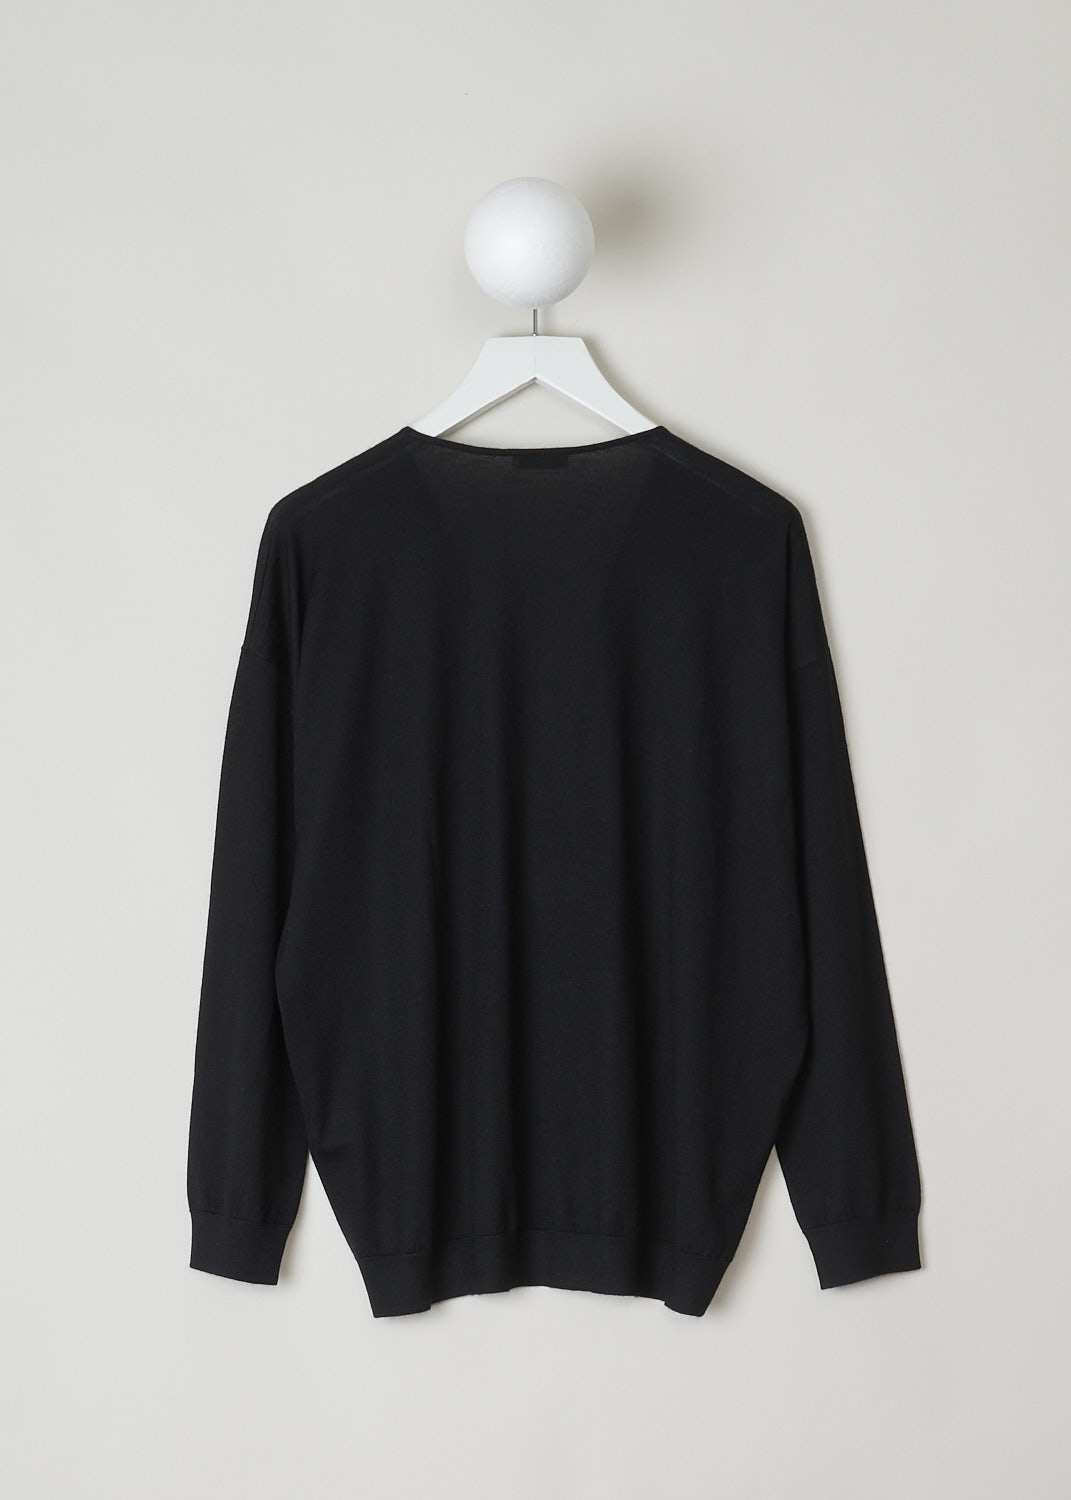 BRUNELLO CUCINELLI, LONG SLEEVE BEADED V-NECK TOP, M13865802_C101, Black, Back, This black long sleeve top is made with a lightweight cashmere blend. The top has a V-neckline that is decorated with the brand's signature monili beads. The cuffs and the hemline have a ribbed finish. 
